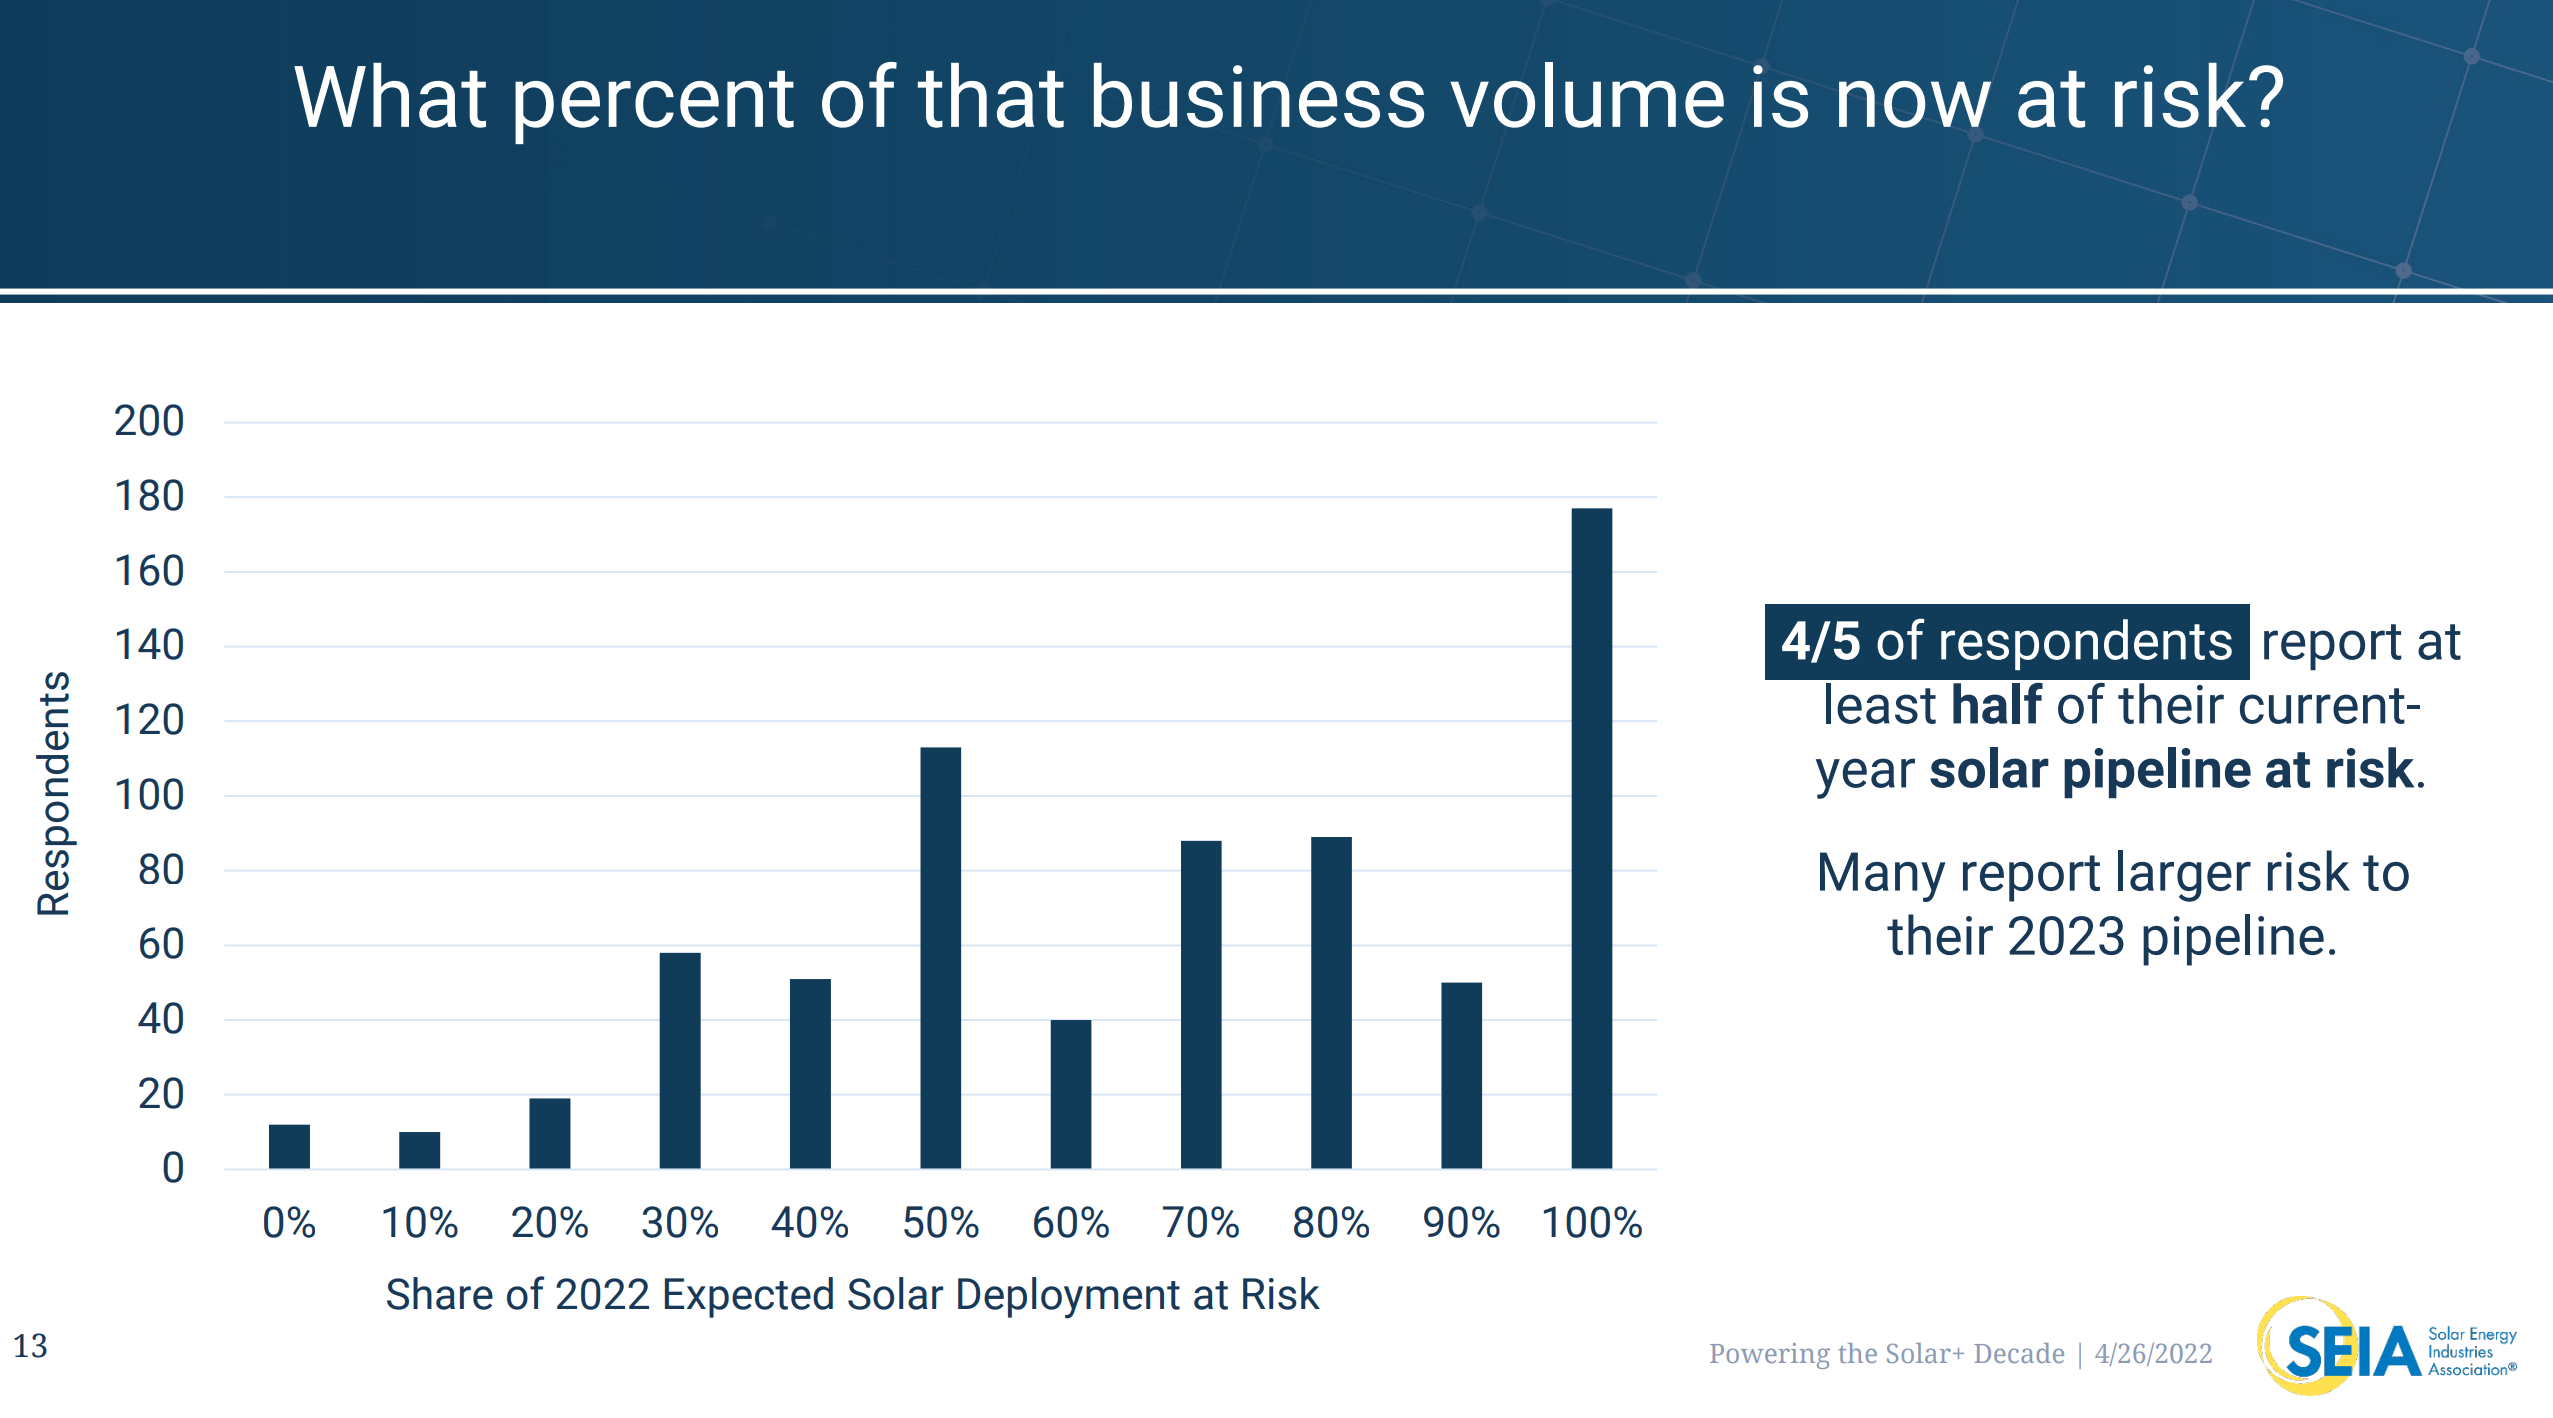 Survey result of solar companies’ business and employment expectations in 2022. This survey result shows the share of 2022 expected solar deployments at risk, with 80 percent of respondents reporting at least half of their current-year solar pipeline at risk. Many report larger risk to their 2023 pipeline. The “Solar Industry Impacts from U.S. Department of Commerce Investigation into Imports of Crystalline Silicon Photovoltaic Modules and Cells from Cambodia, Malaysia, Thailand and Vietnam” survey seeks to measure impacts of Dept. of Commerce’s decision to take up the Auxin anti-circumvention petition on solar companies’ business and employment expectations in 2022. 730 responses collected between March 31 and April 21 from SEIA member and non-member companies. From the 730 responses, we matched 596 business locations from SEIA’s database of companies active in the U.S. solar industry. These responses make up all state-level impact analysis presented. Graphic: SEIA